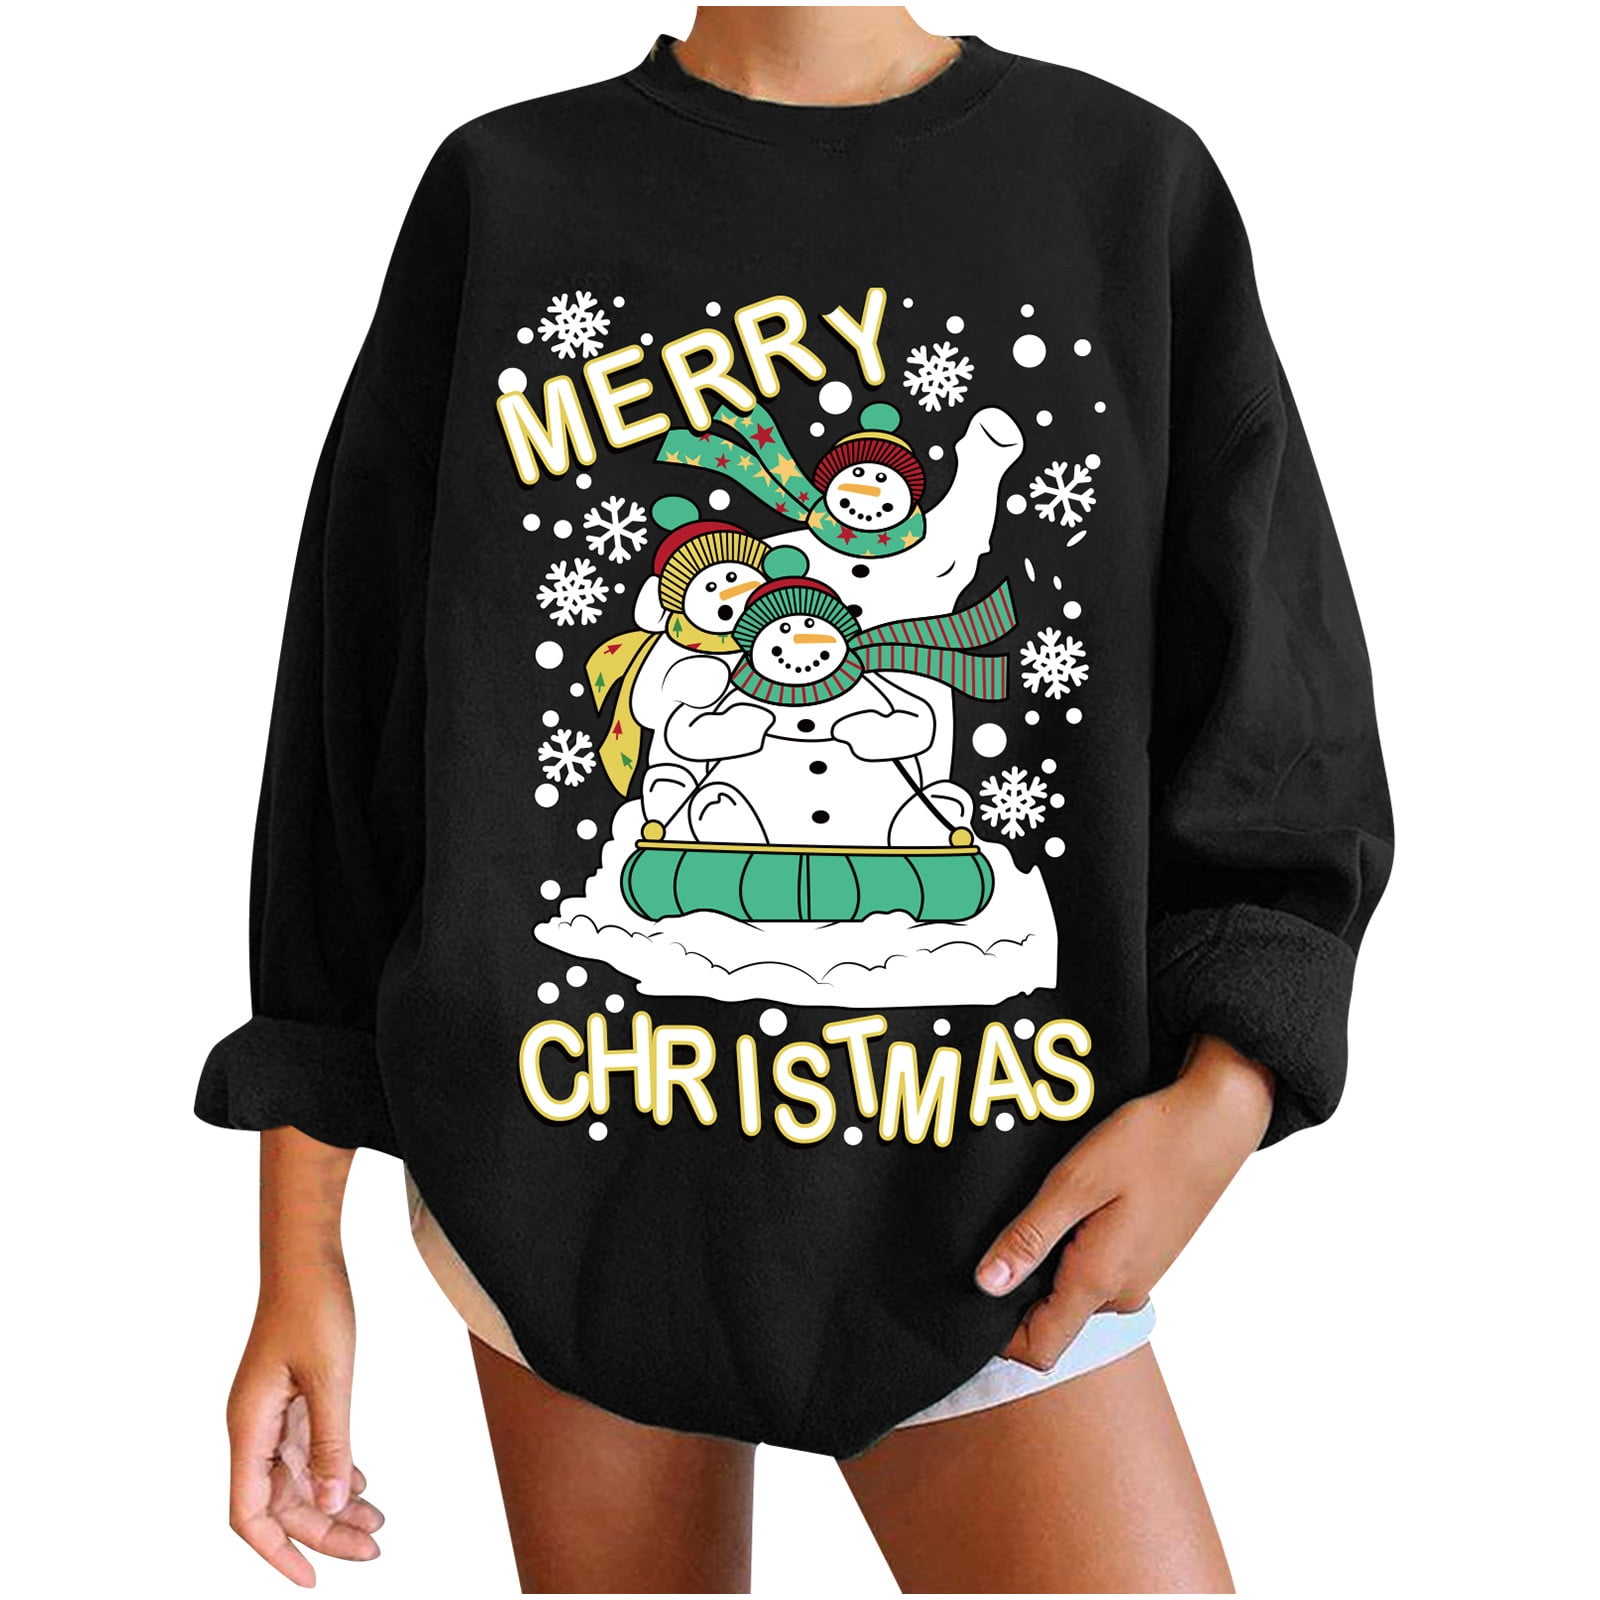 Womens Christmas Sweatshirt,Christmas Sweater Fashion,prime membership,2  dollar items only,prime deals of the day today only,online shopping for  women,overstock clearance,christmas+clearance : Clothing, Shoes & Jewelry 